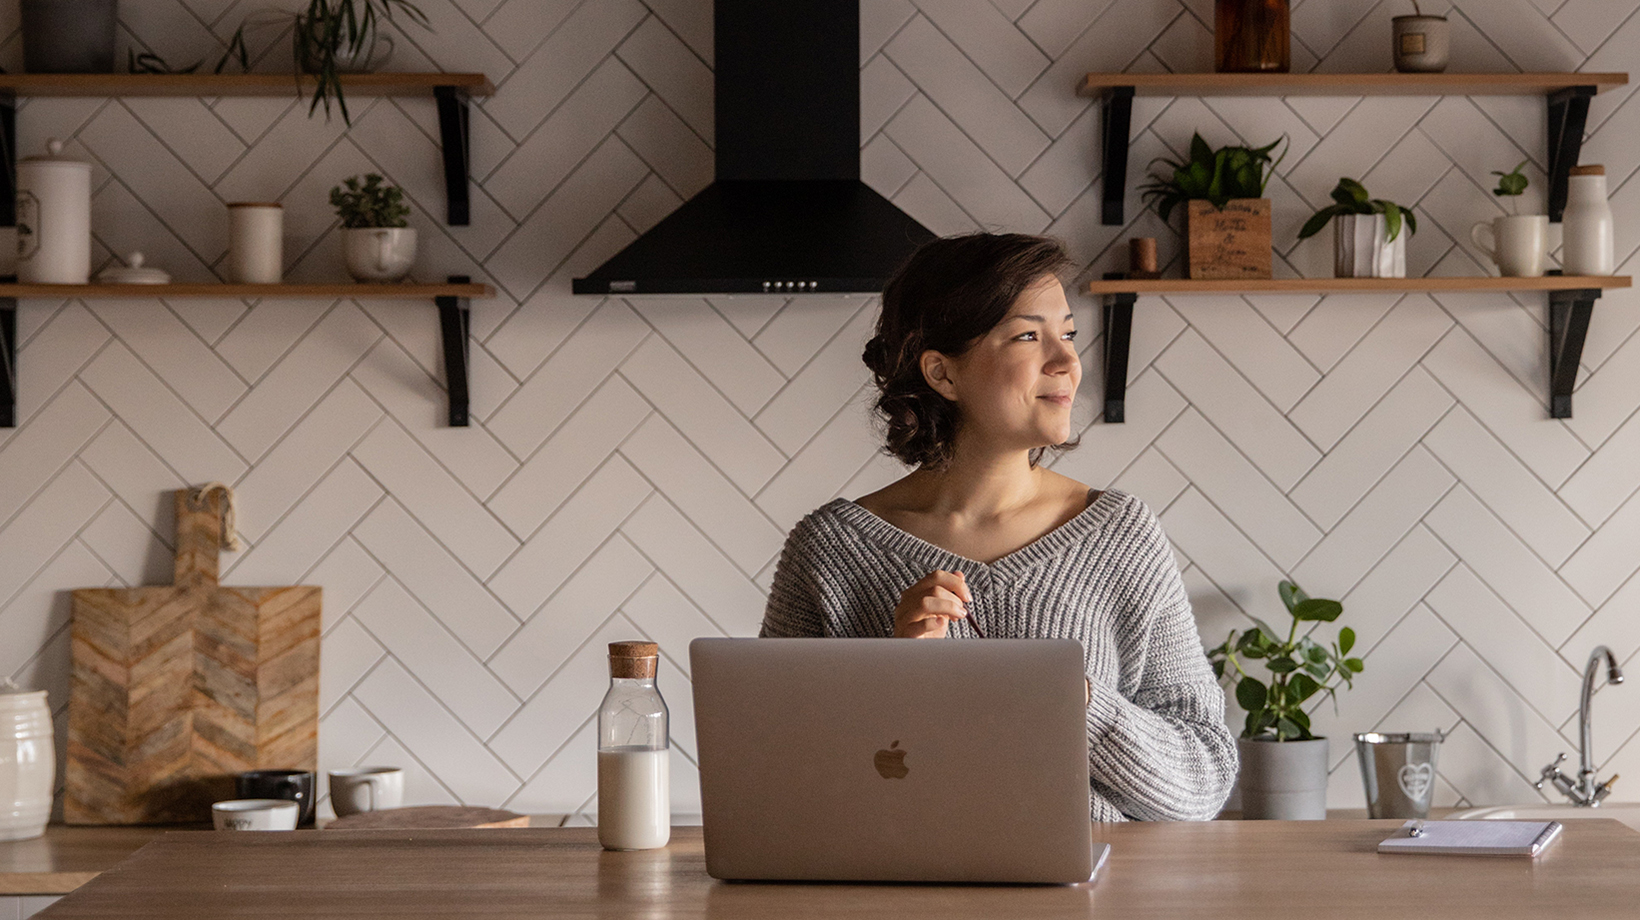 woman taking a break to look to what seems to be a window, while working on a laptop at a kitchen counter